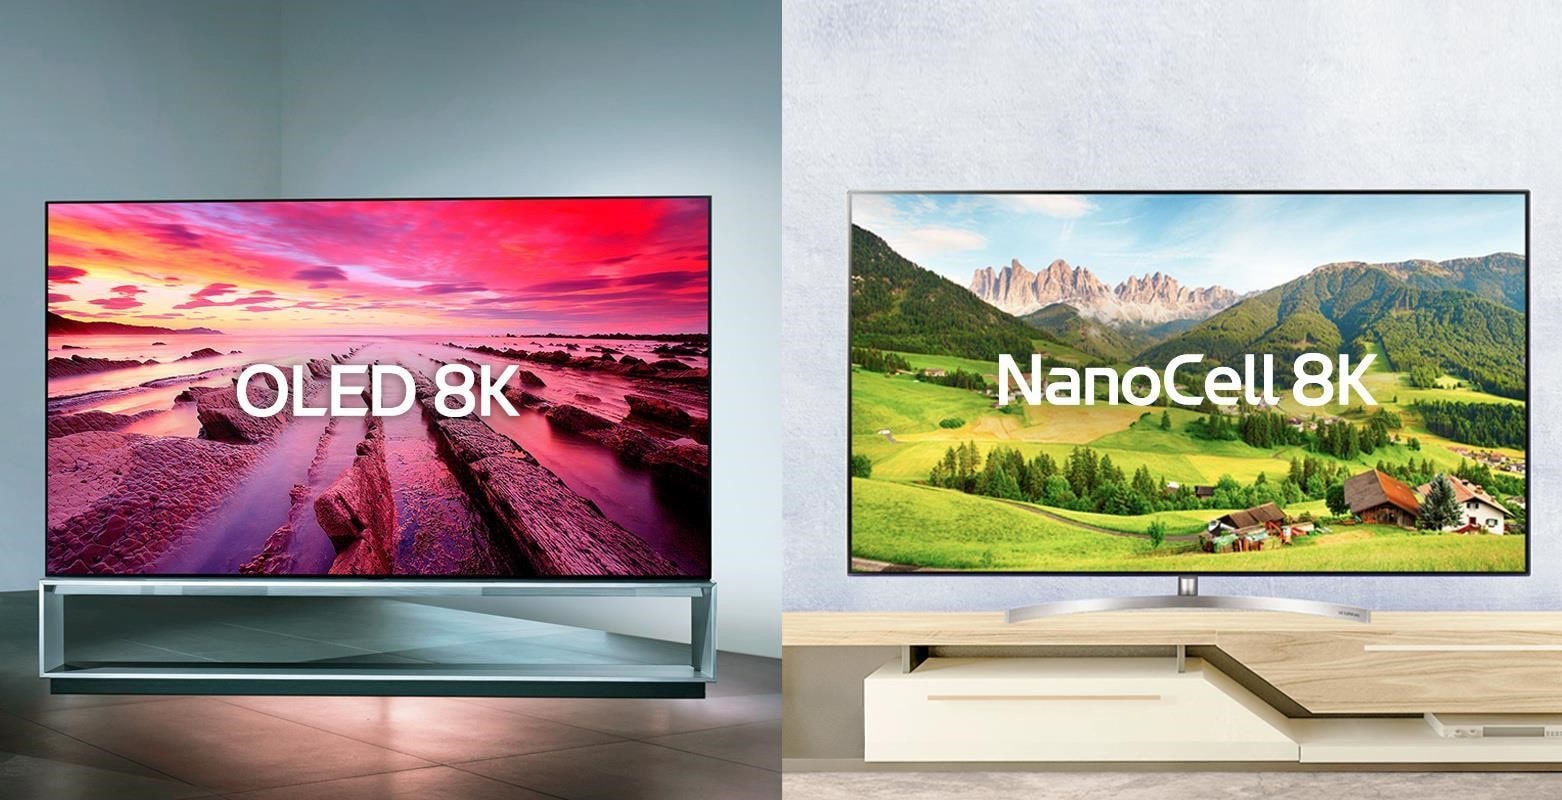 LED vs. OLED vs. QLED TVs – What's the Difference?